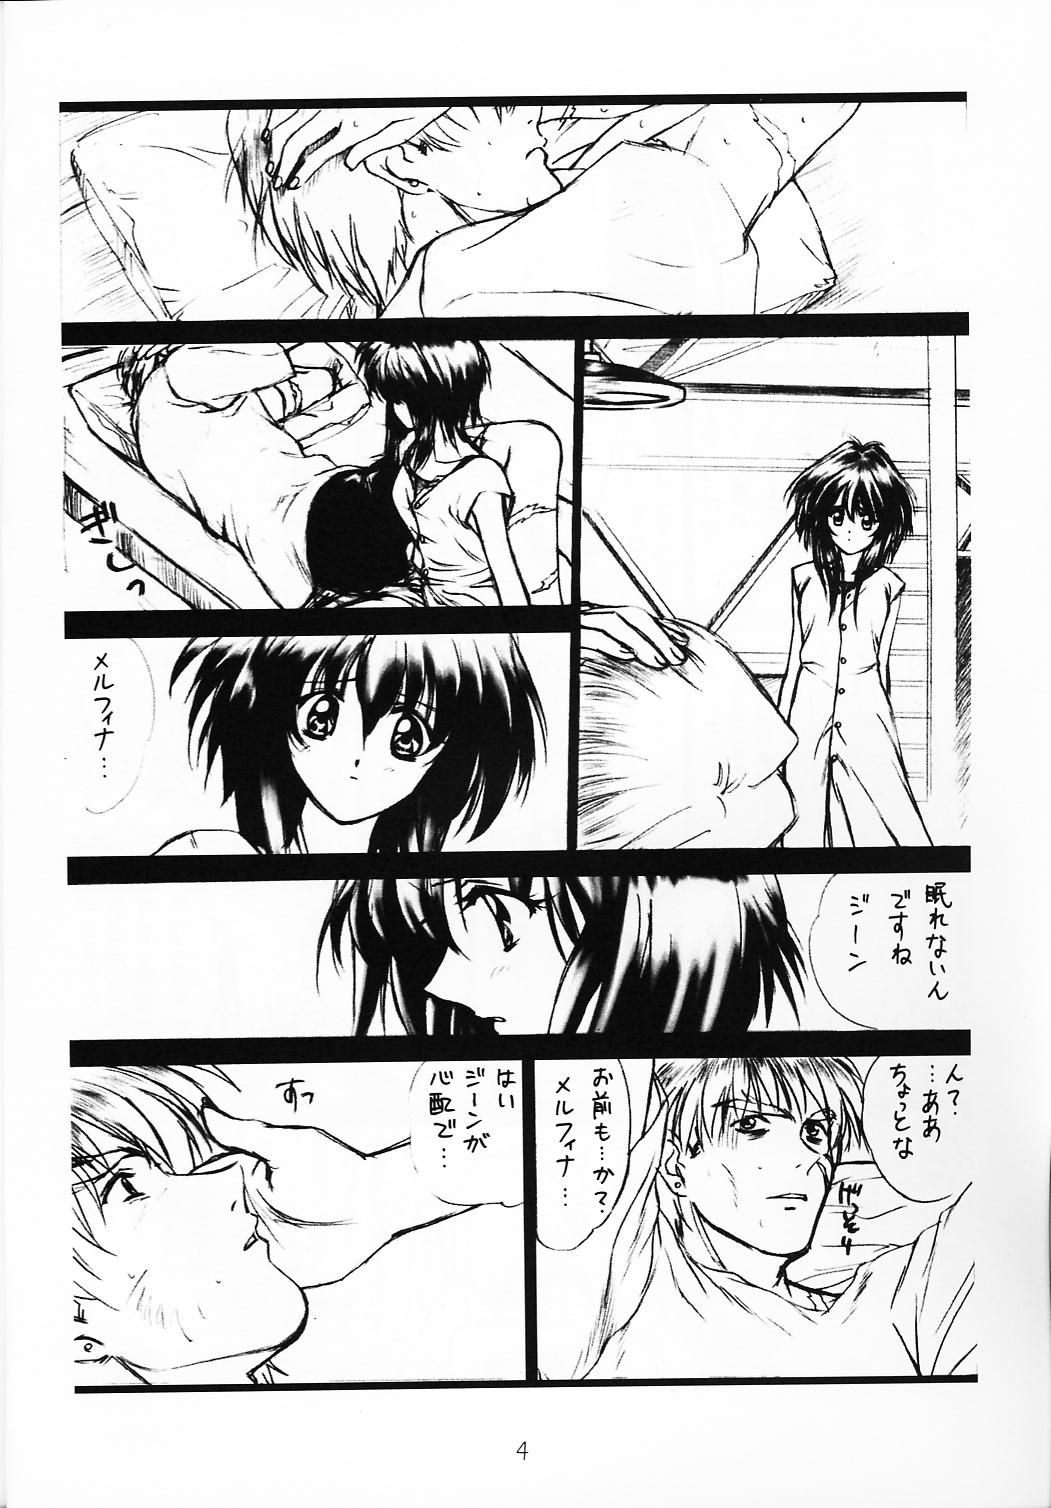 Anus voguish I OUTLAW STAR - Outlaw star Vip - Page 3